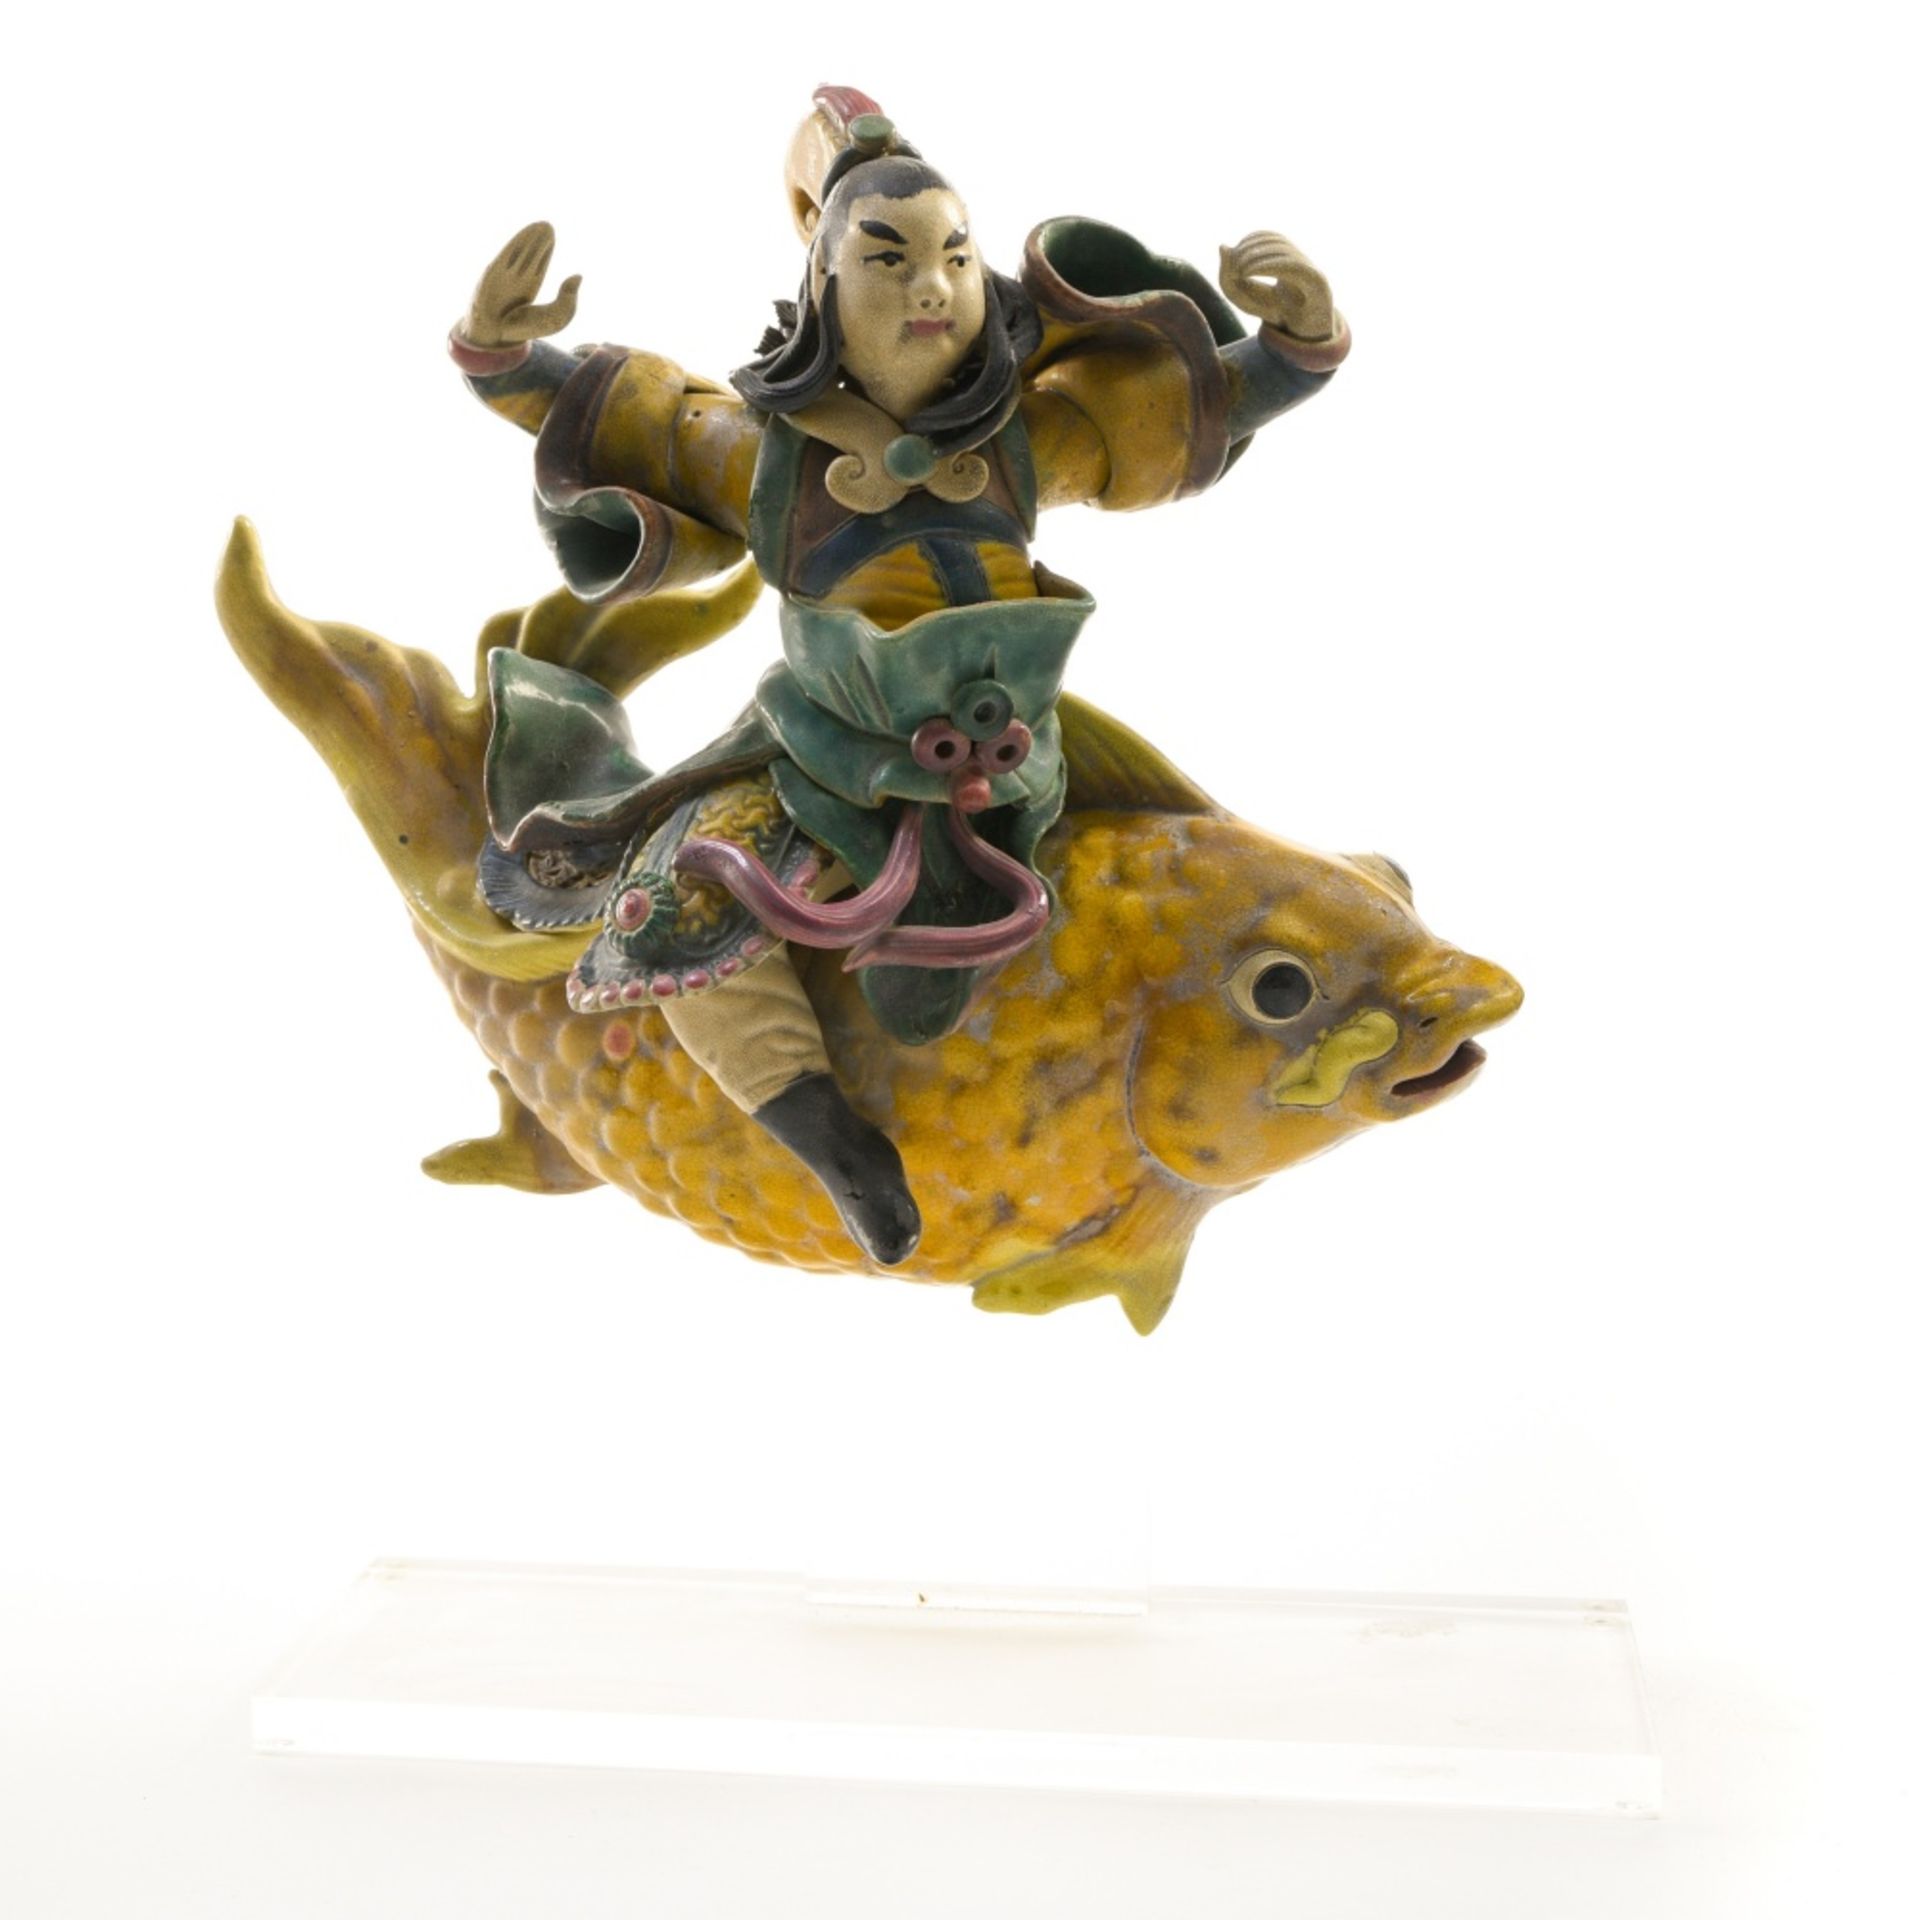 China, 20th century Immortal riding a fish, Polychrome majolica. On a stand. Height (cm) : 26 - - Image 2 of 2